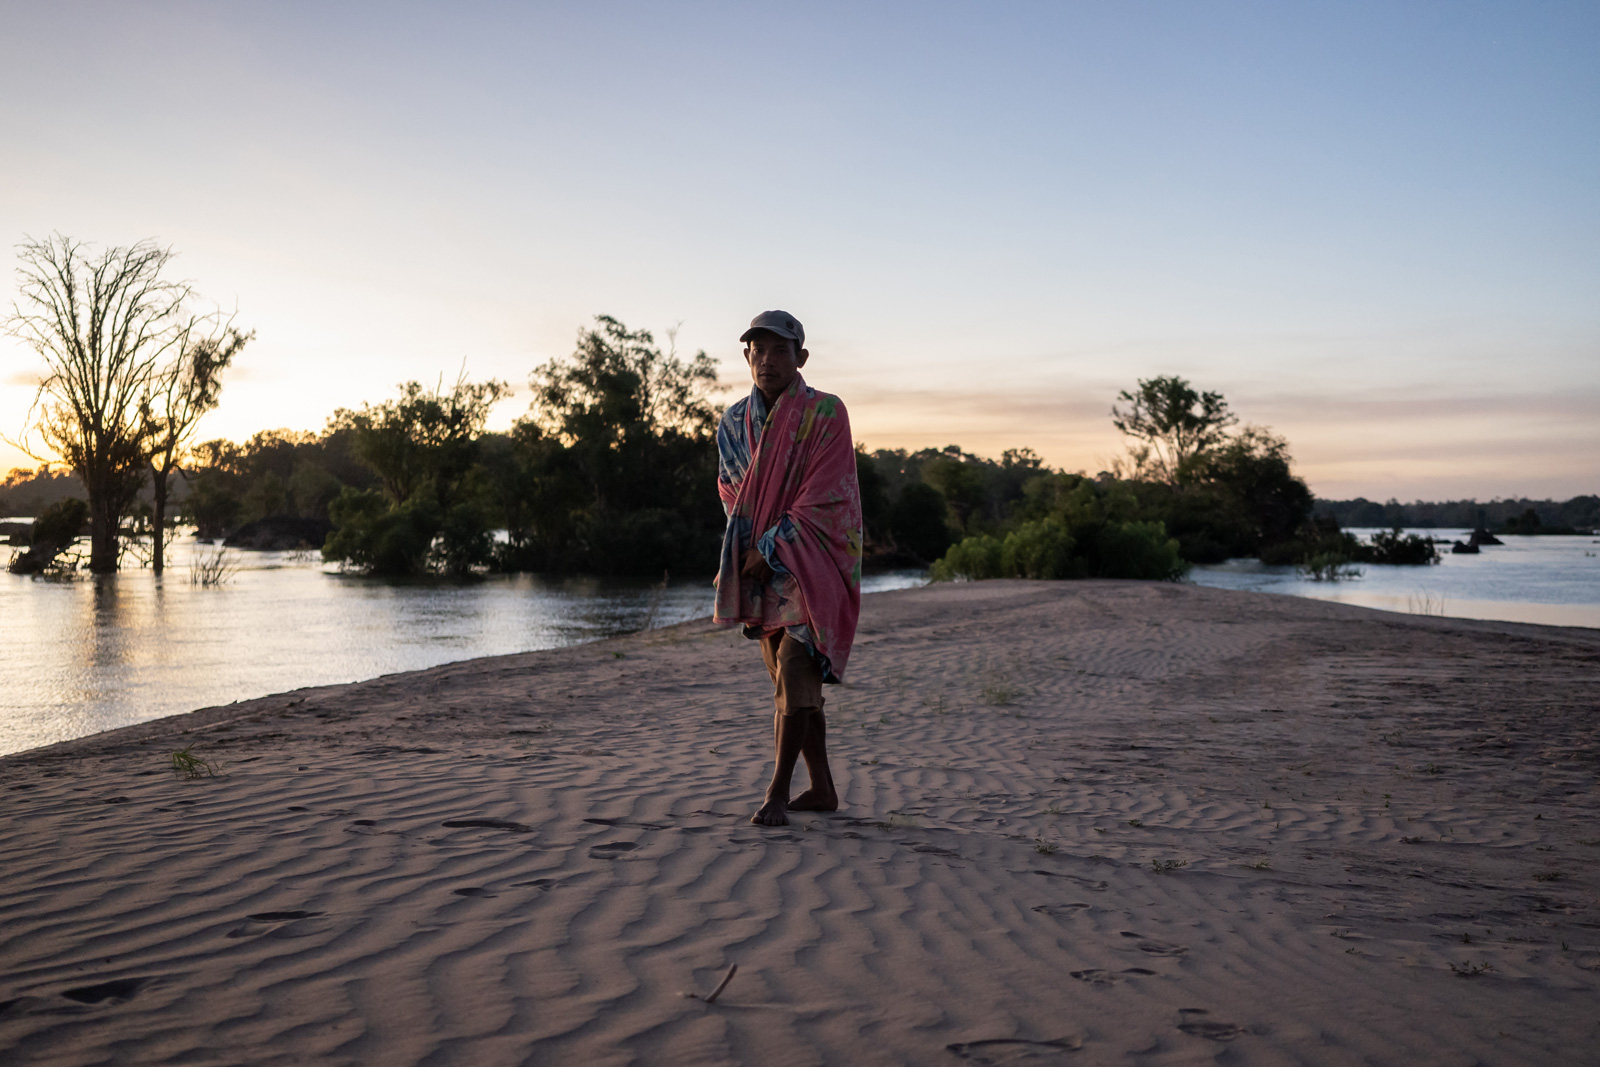 A community fishery patroller wakes up on a sandbank in the Mekong River that the team had been camping on while on the lookout for illegal fishers.